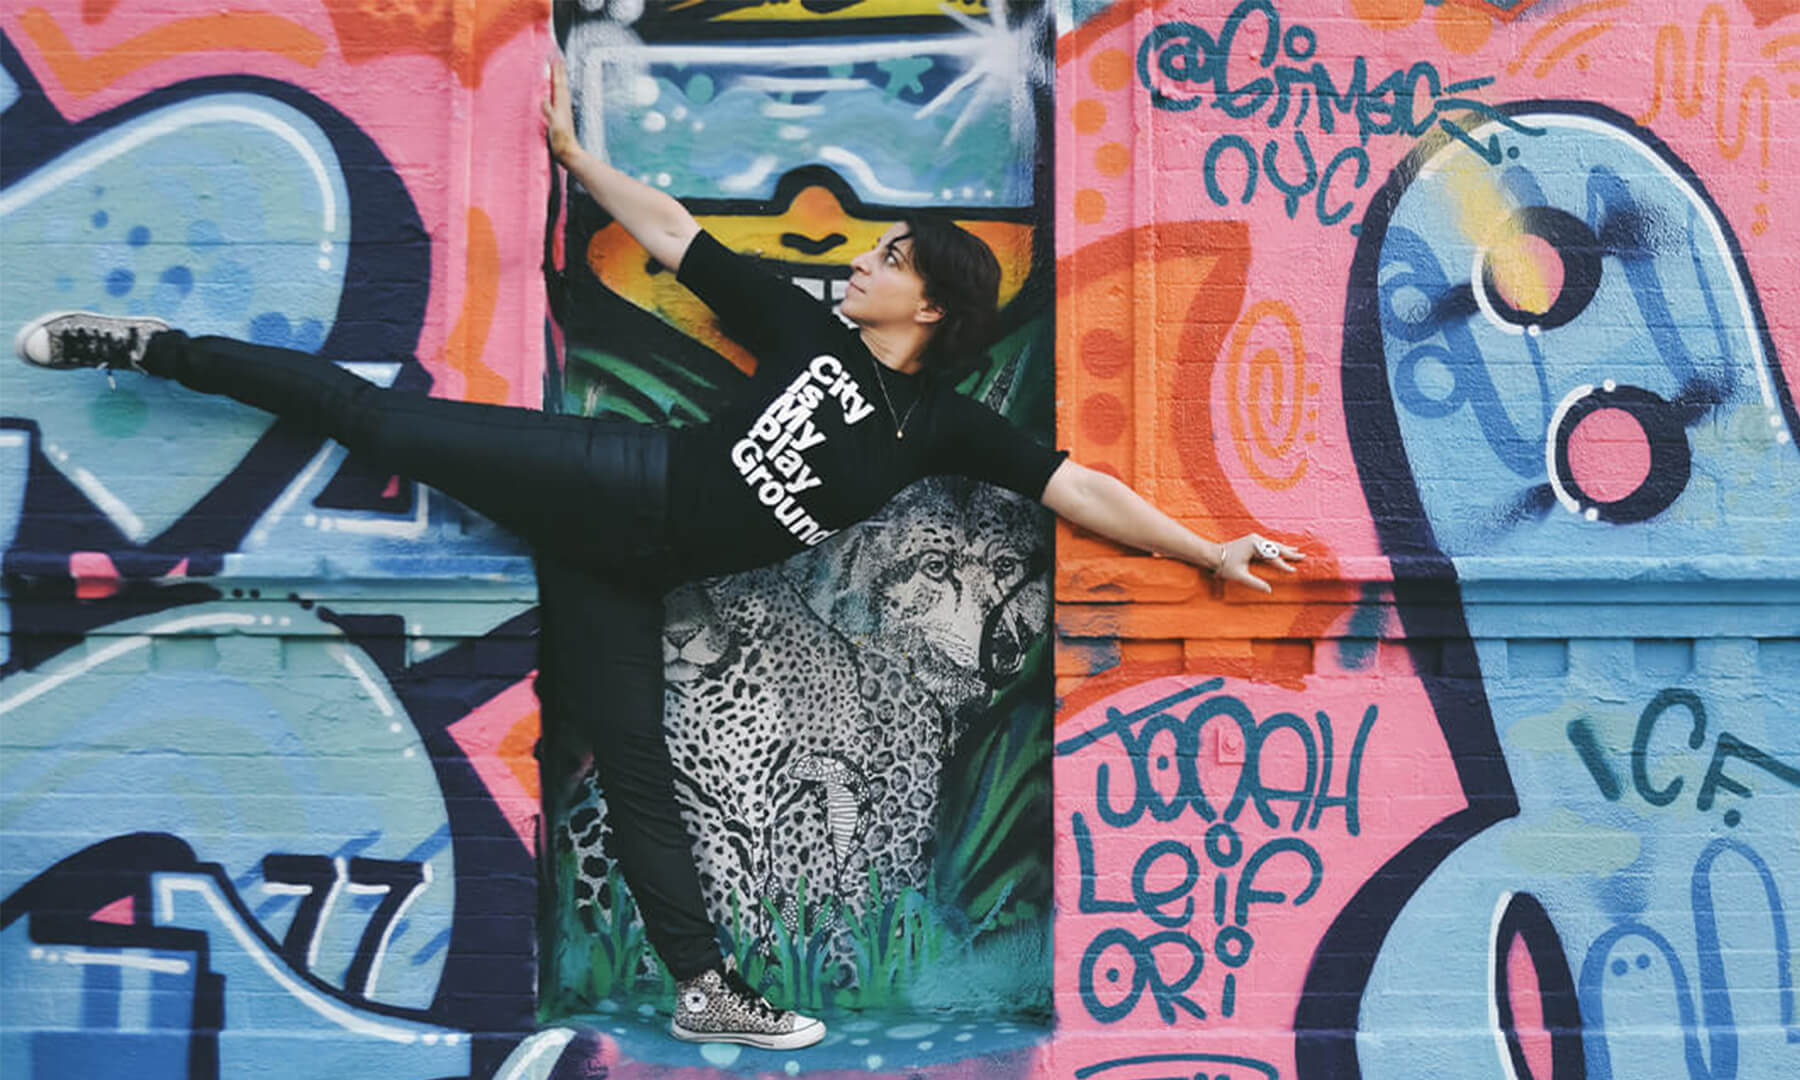 A person posing in front of a graffiti wall